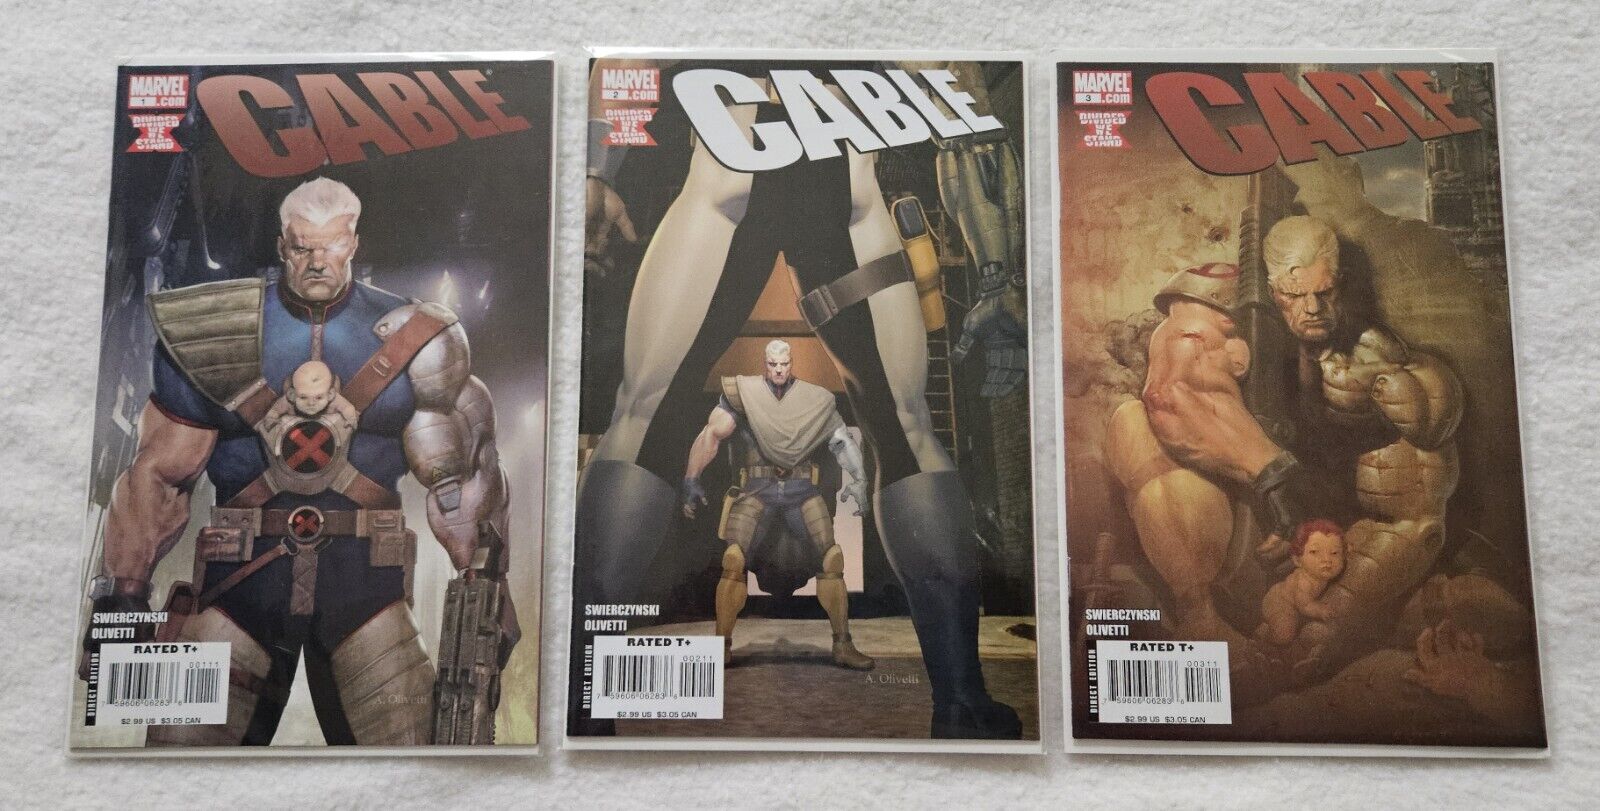 Cable (Marvel 2008 series) #1 - 3 - All 1st Printing - EXCELLENT